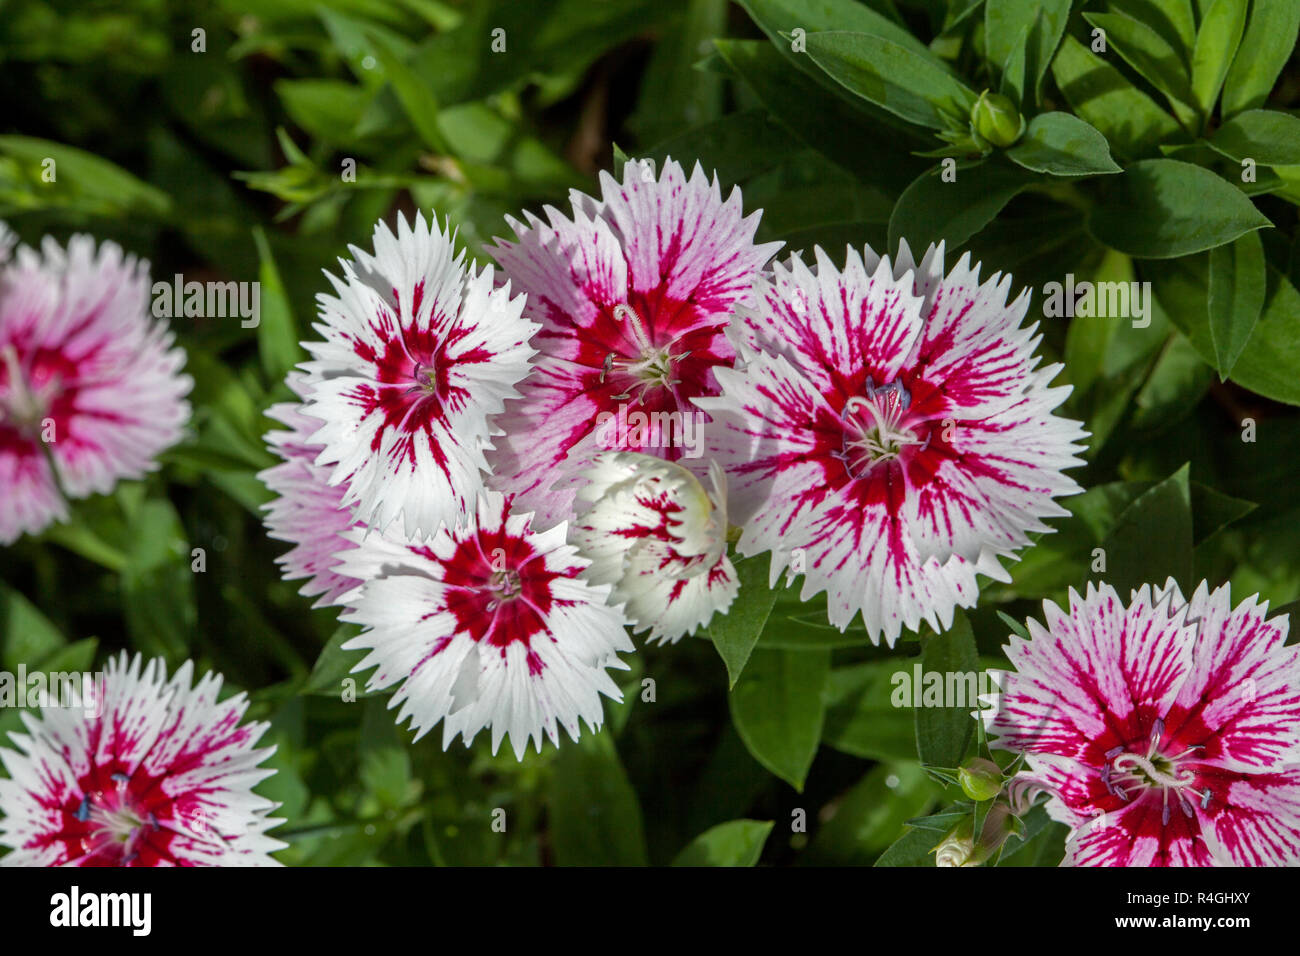 Cluster of beautiful red and white dianthus flowers with jagged edges to petals against background of emerald green leaves Stock Photo